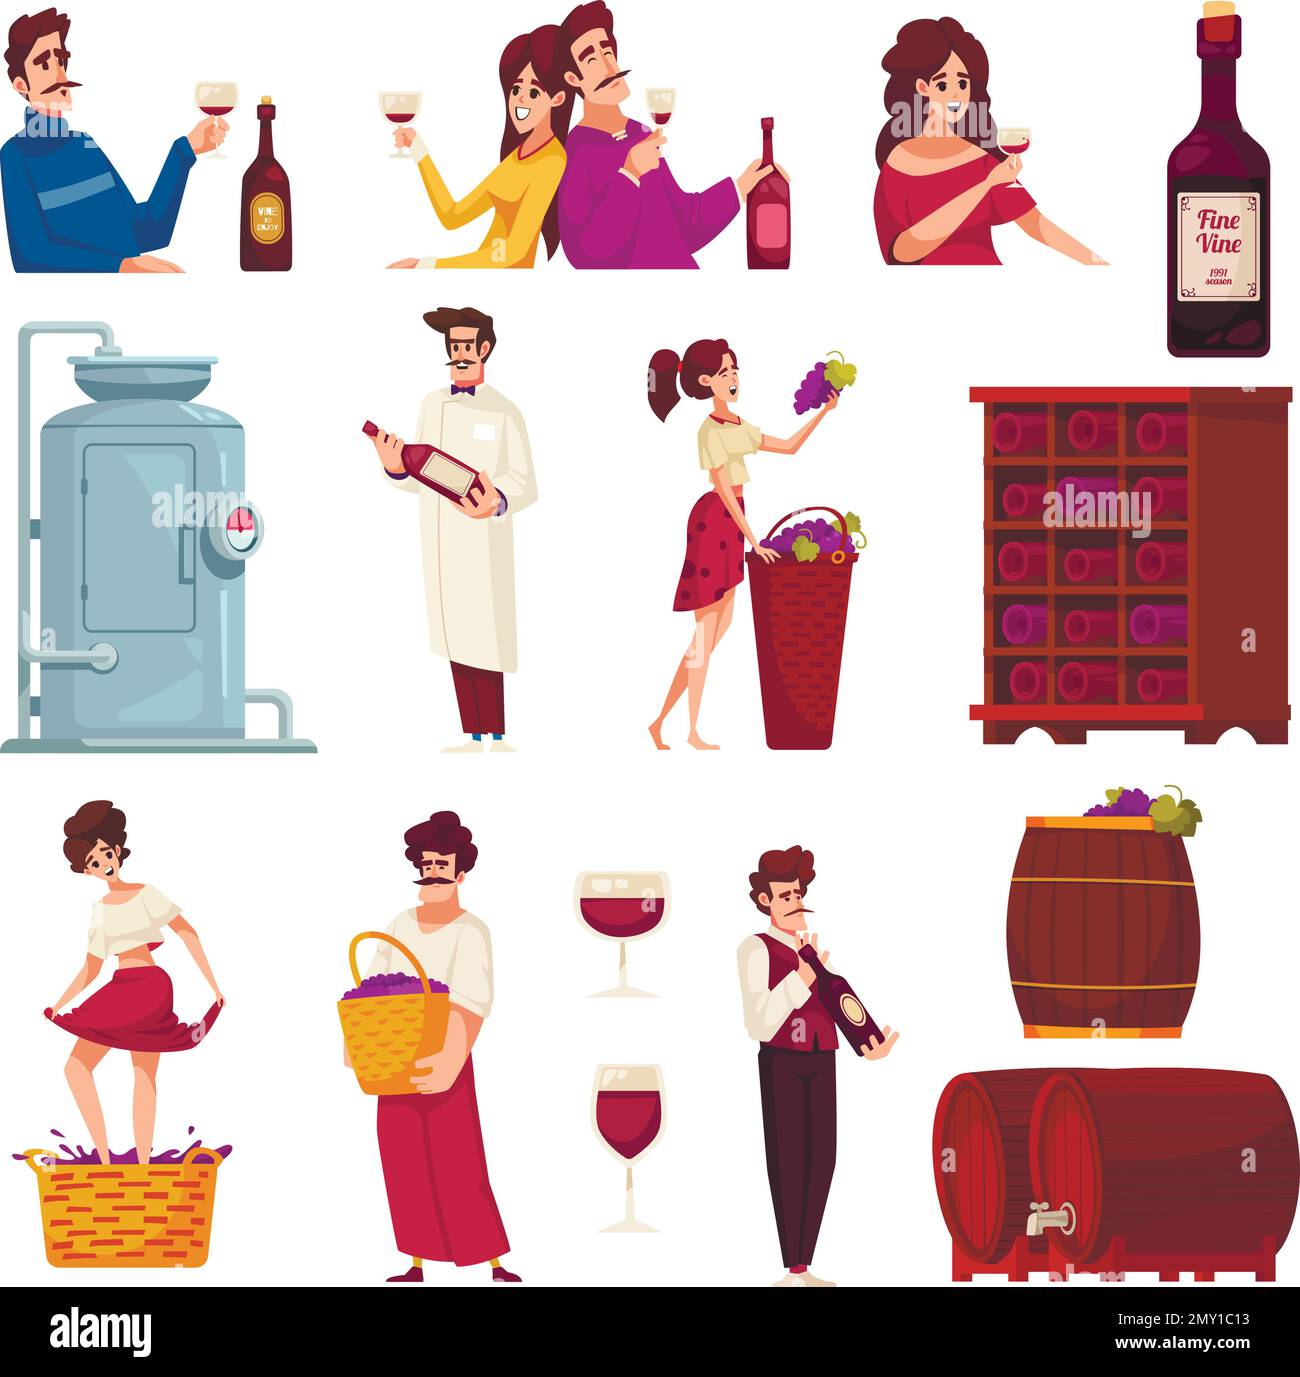 Wine cartoon icons set with production and drinking scenes isolated vector illustration Stock Vector